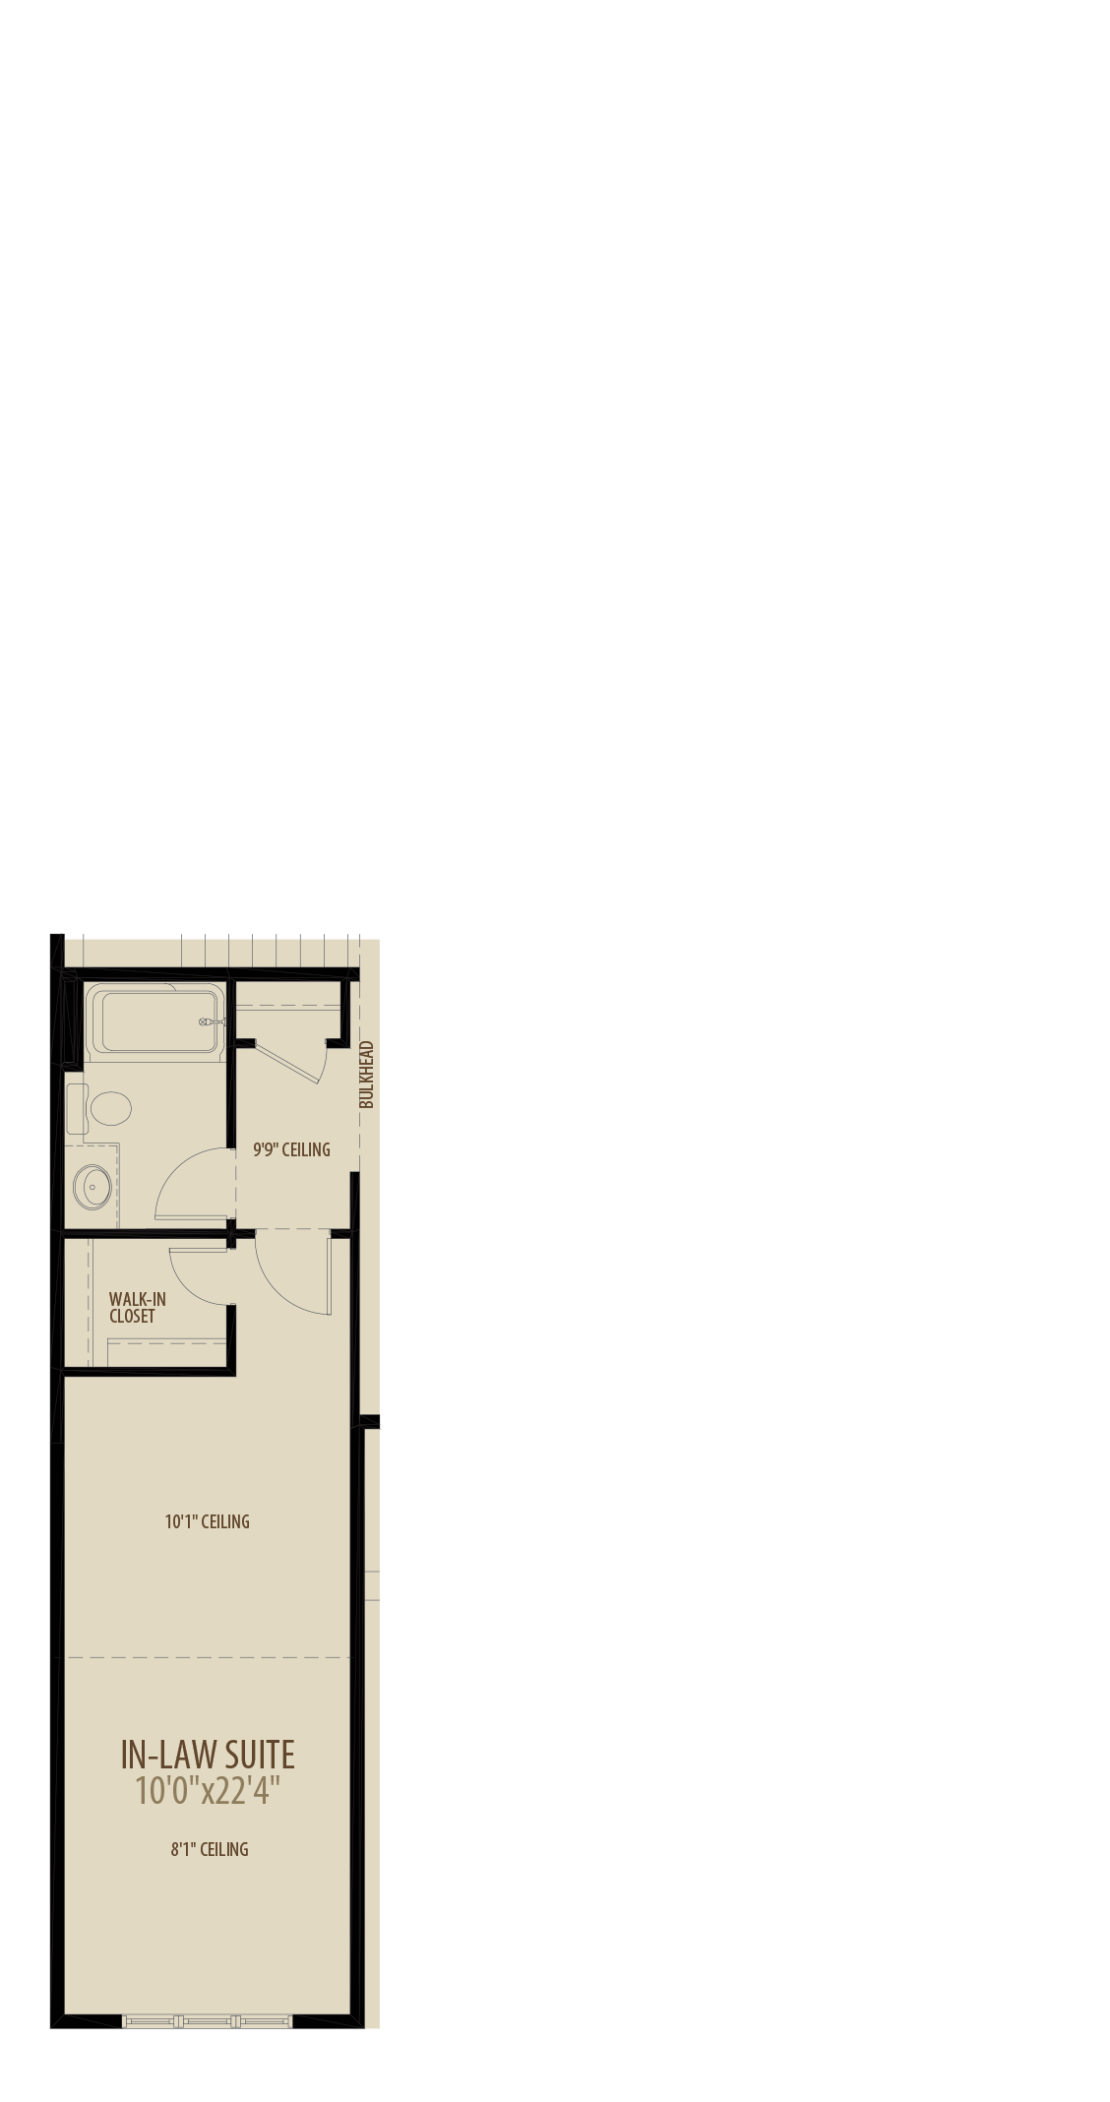 Deluxe In Law Suite Adds 208 sq ft